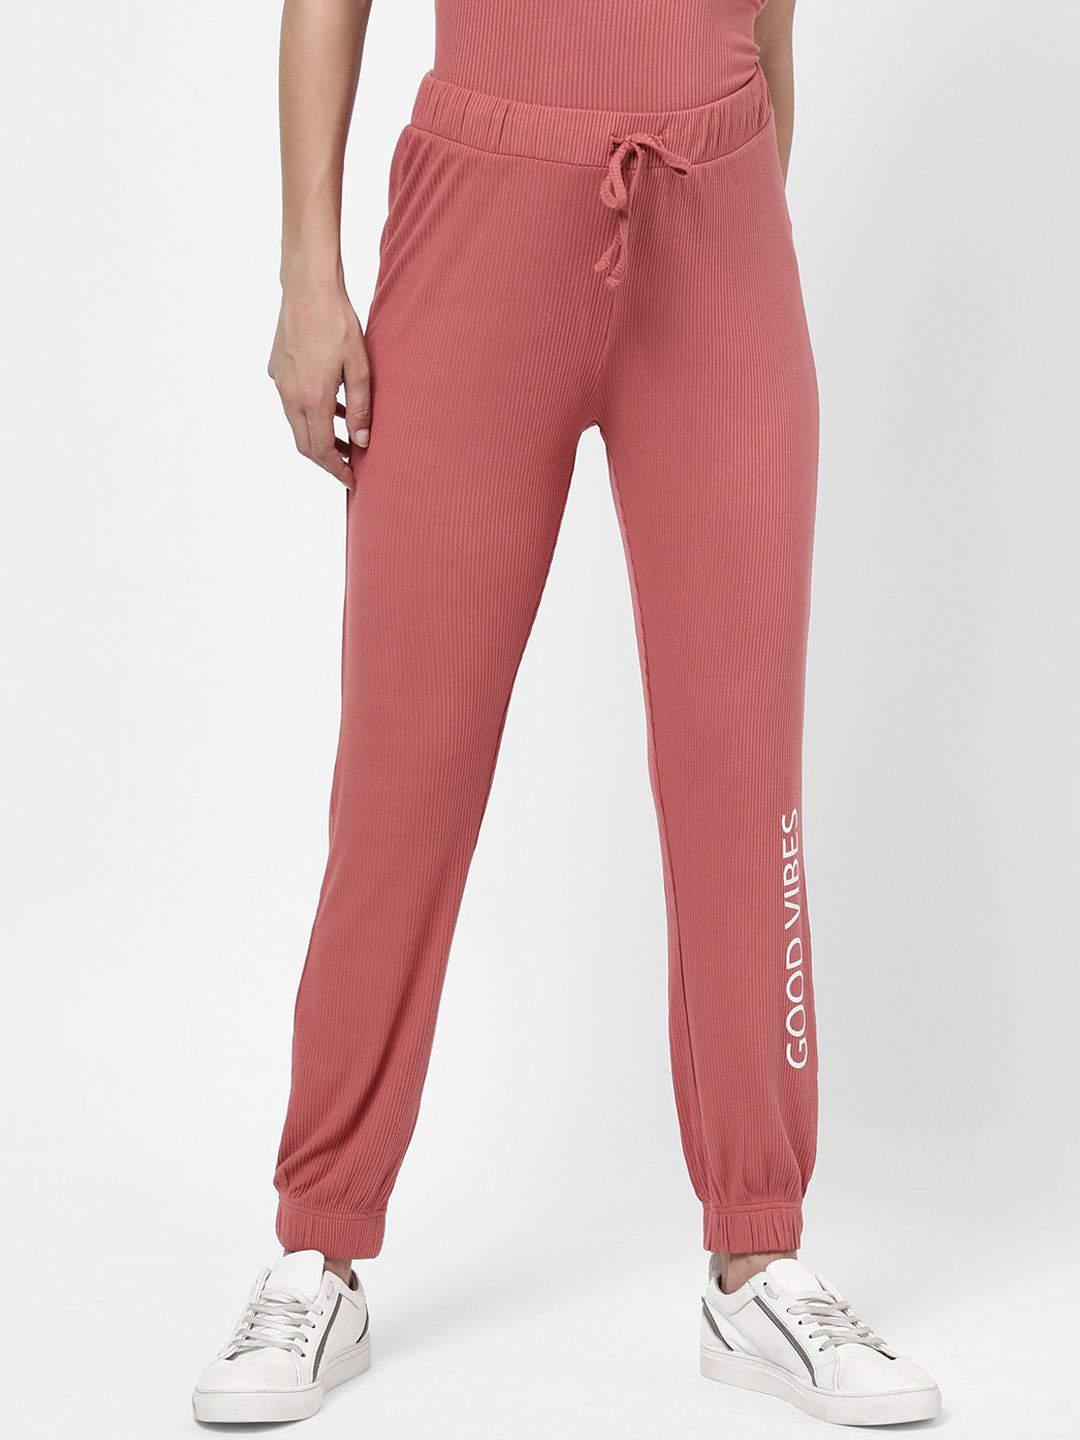 R&B Women Pink Joggers Trousers Price in India